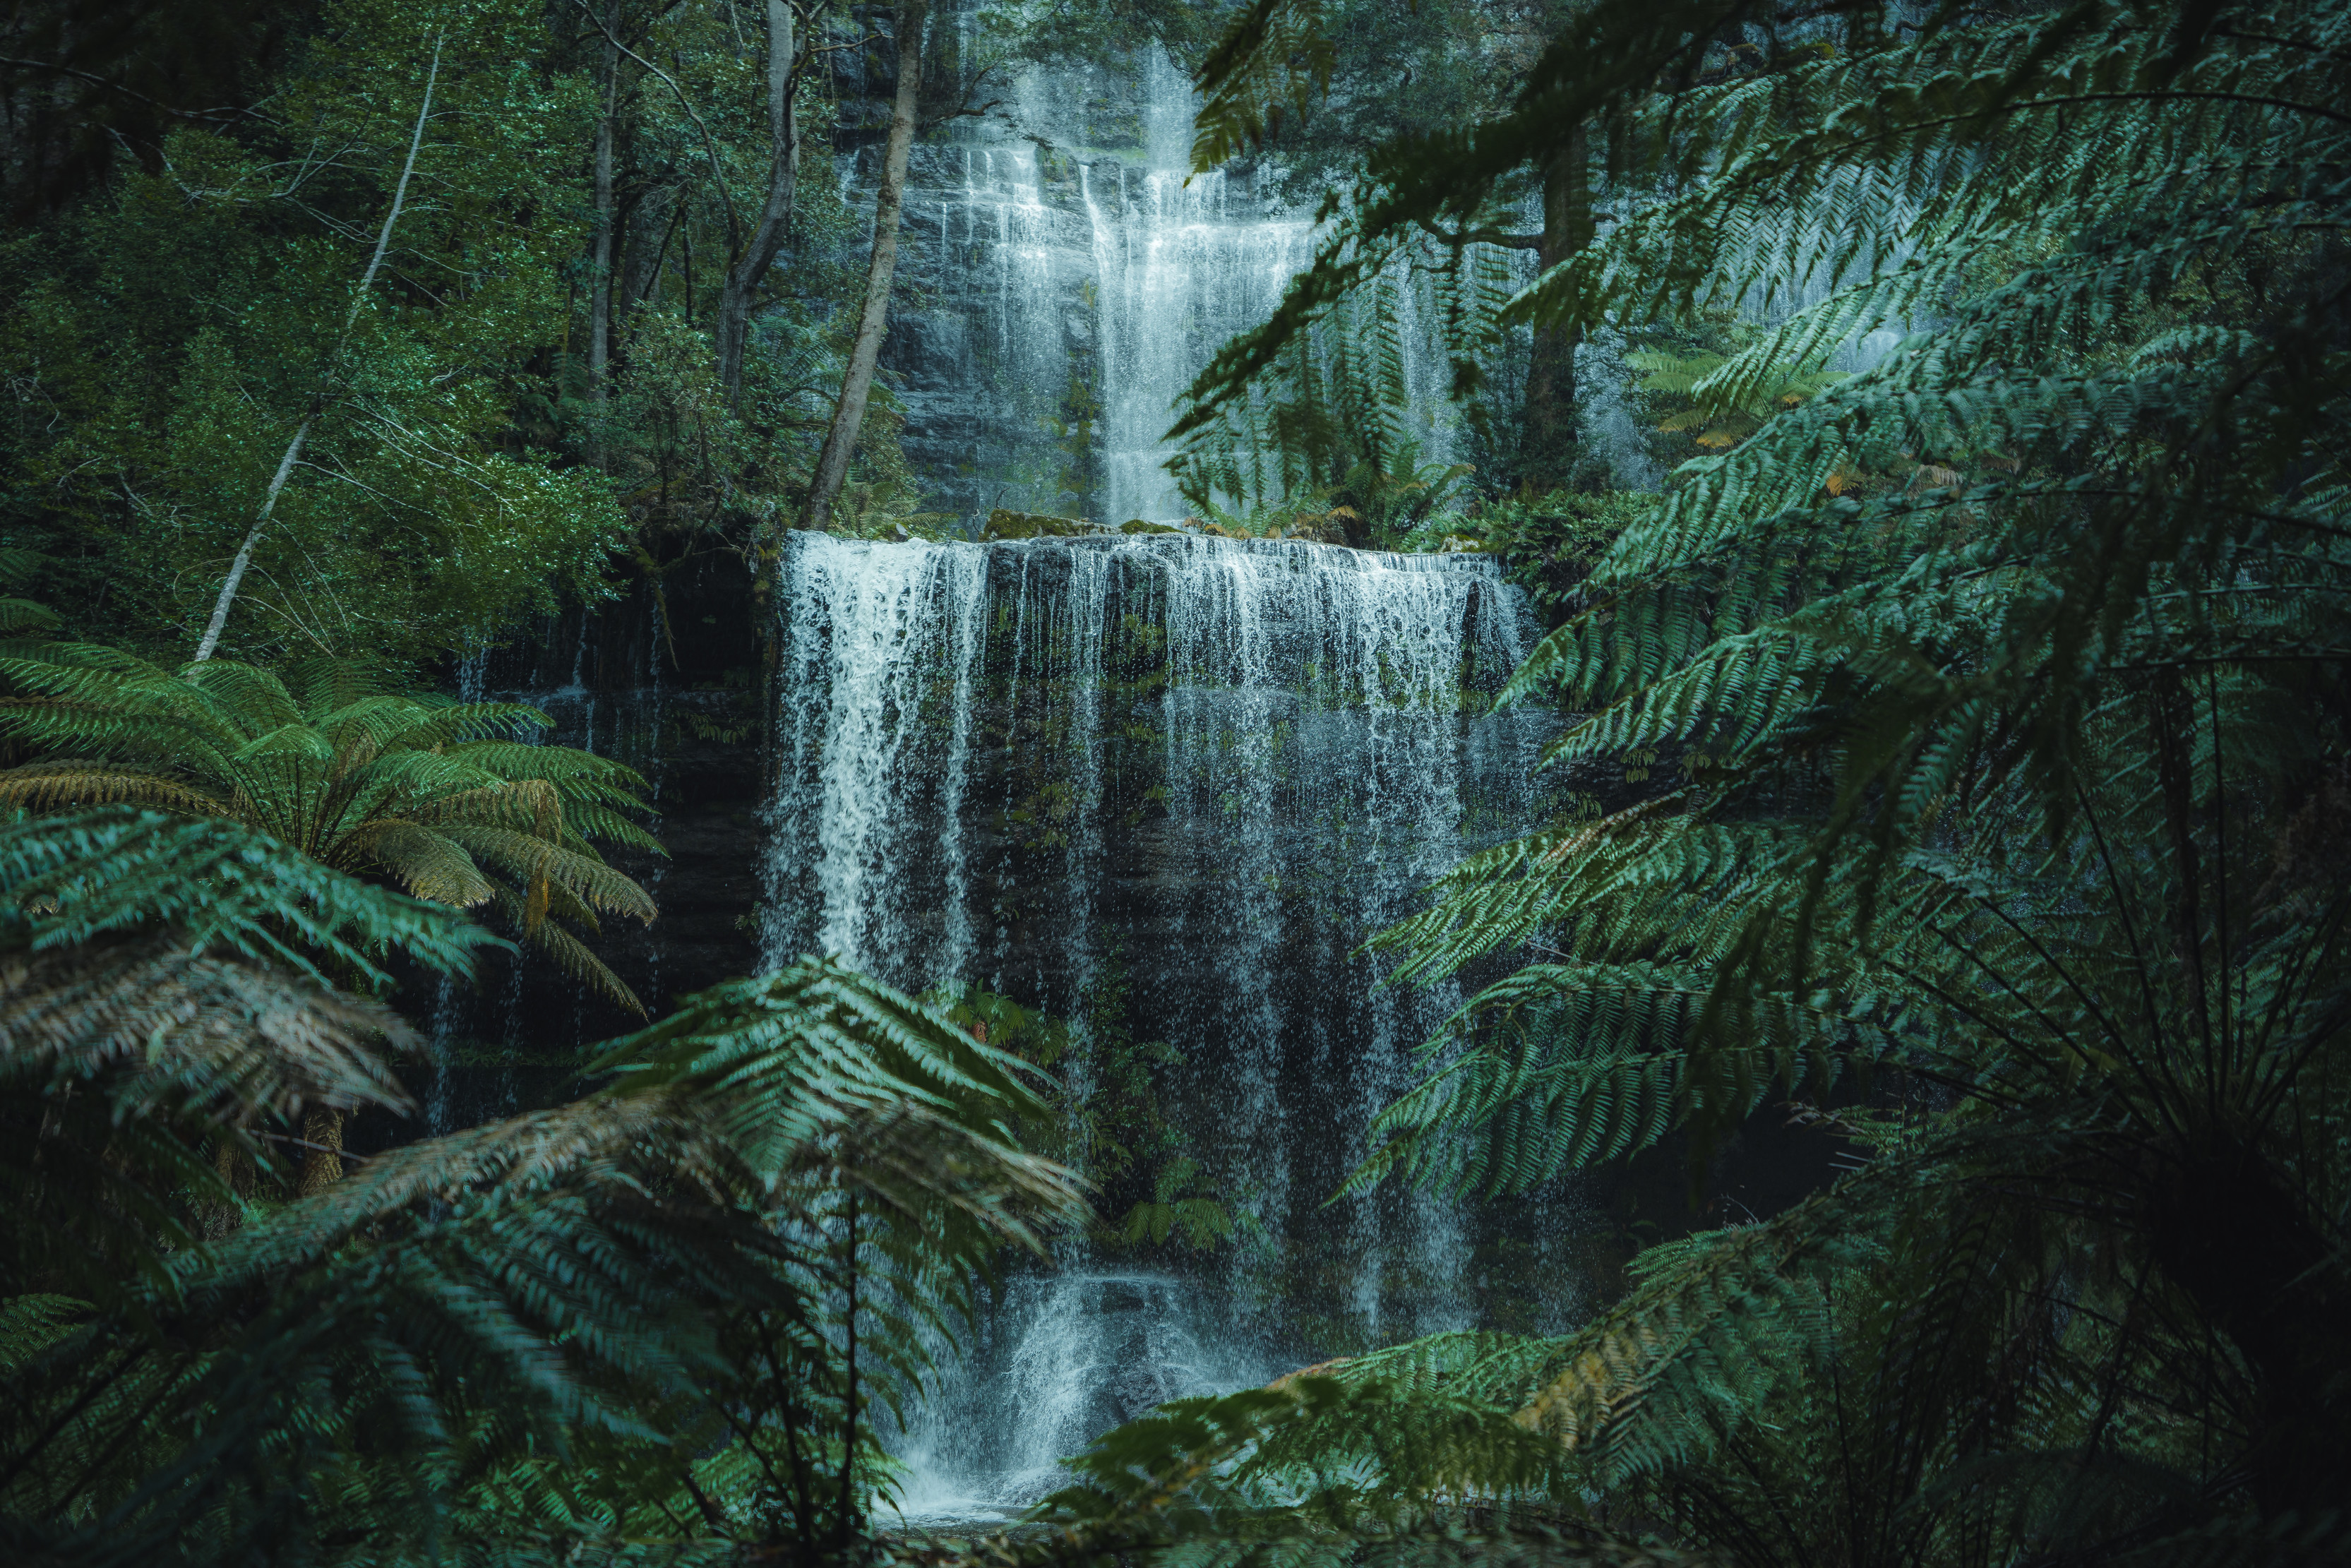 A moody and captivating image of Russell Falls, surrounded by dense, lush rainforest.